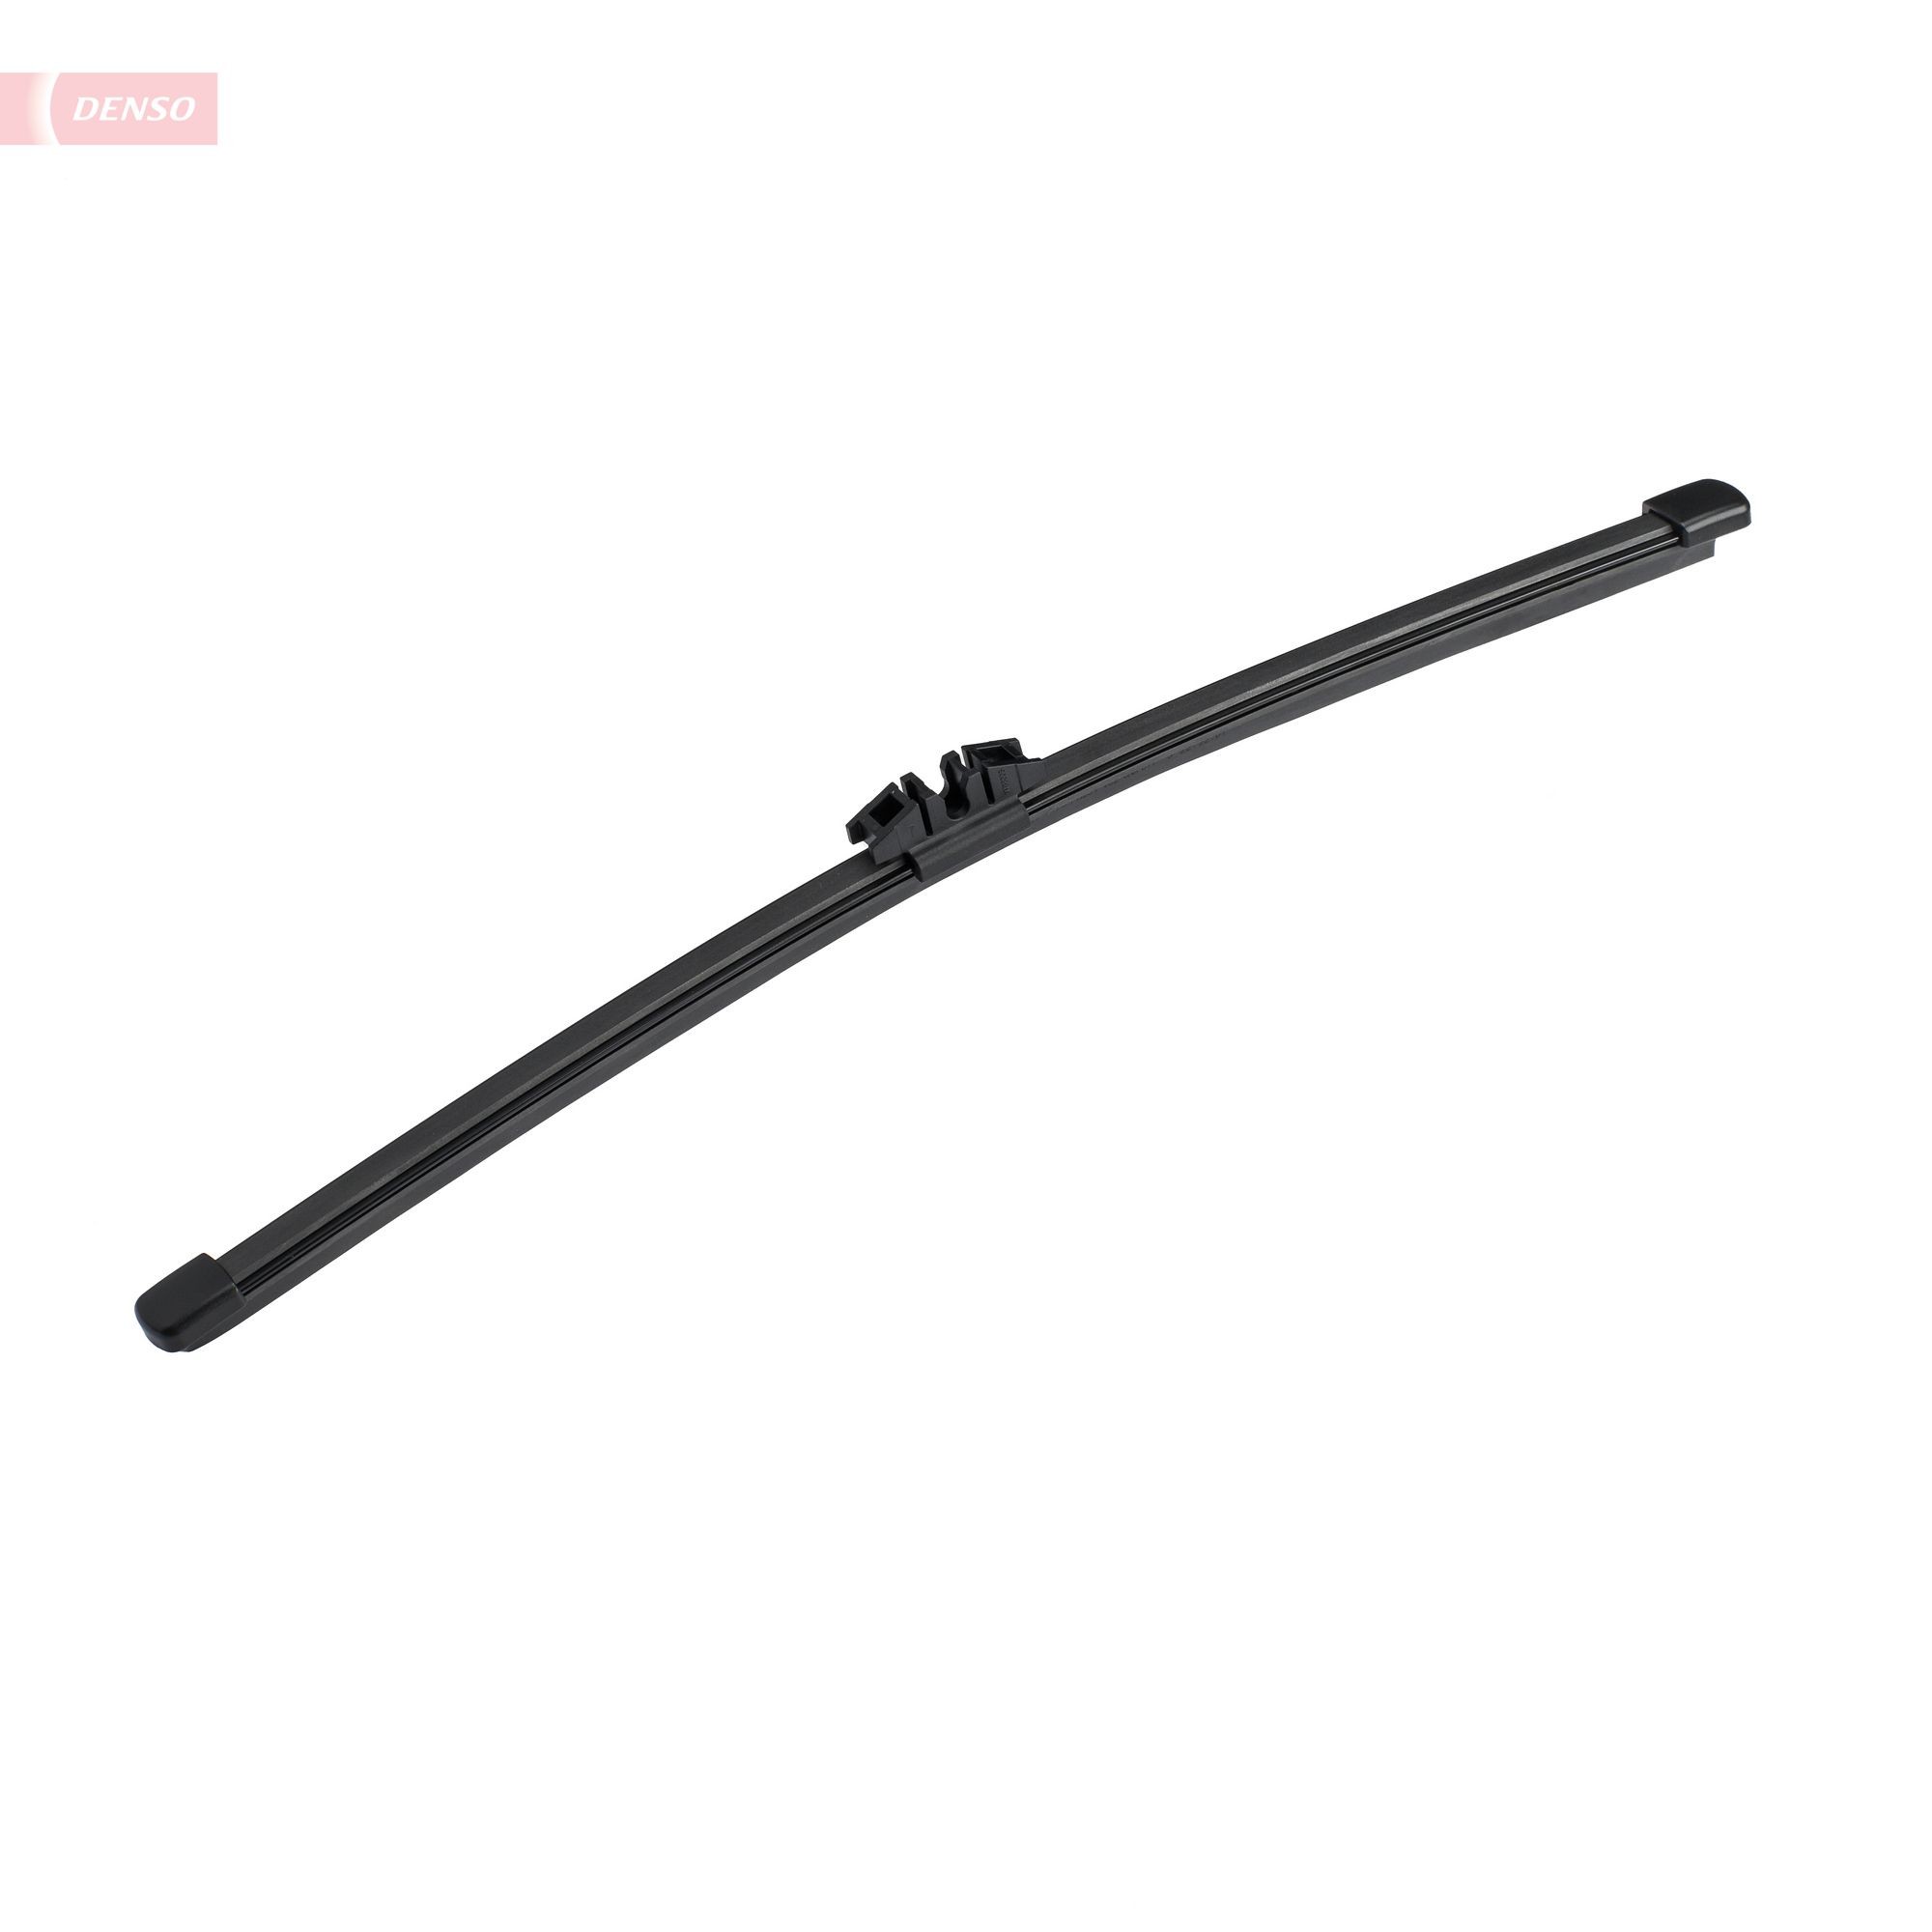 Ford FOCUS Window wipers 20474779 DENSO DF-320 online buy